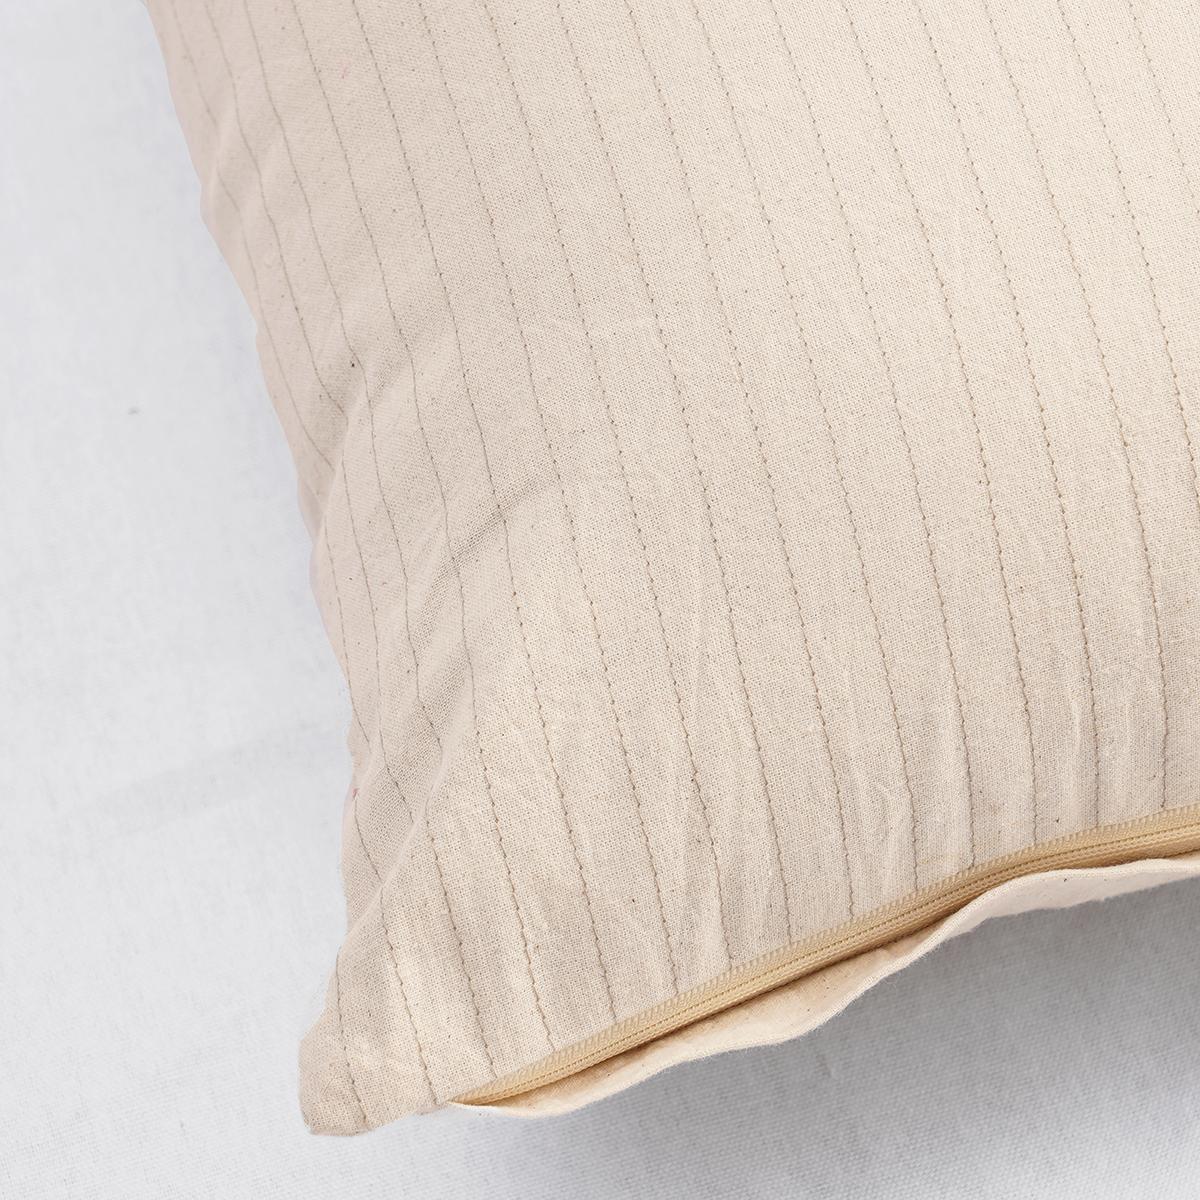 Natural colour striped cotton Pillow cover, sizes available